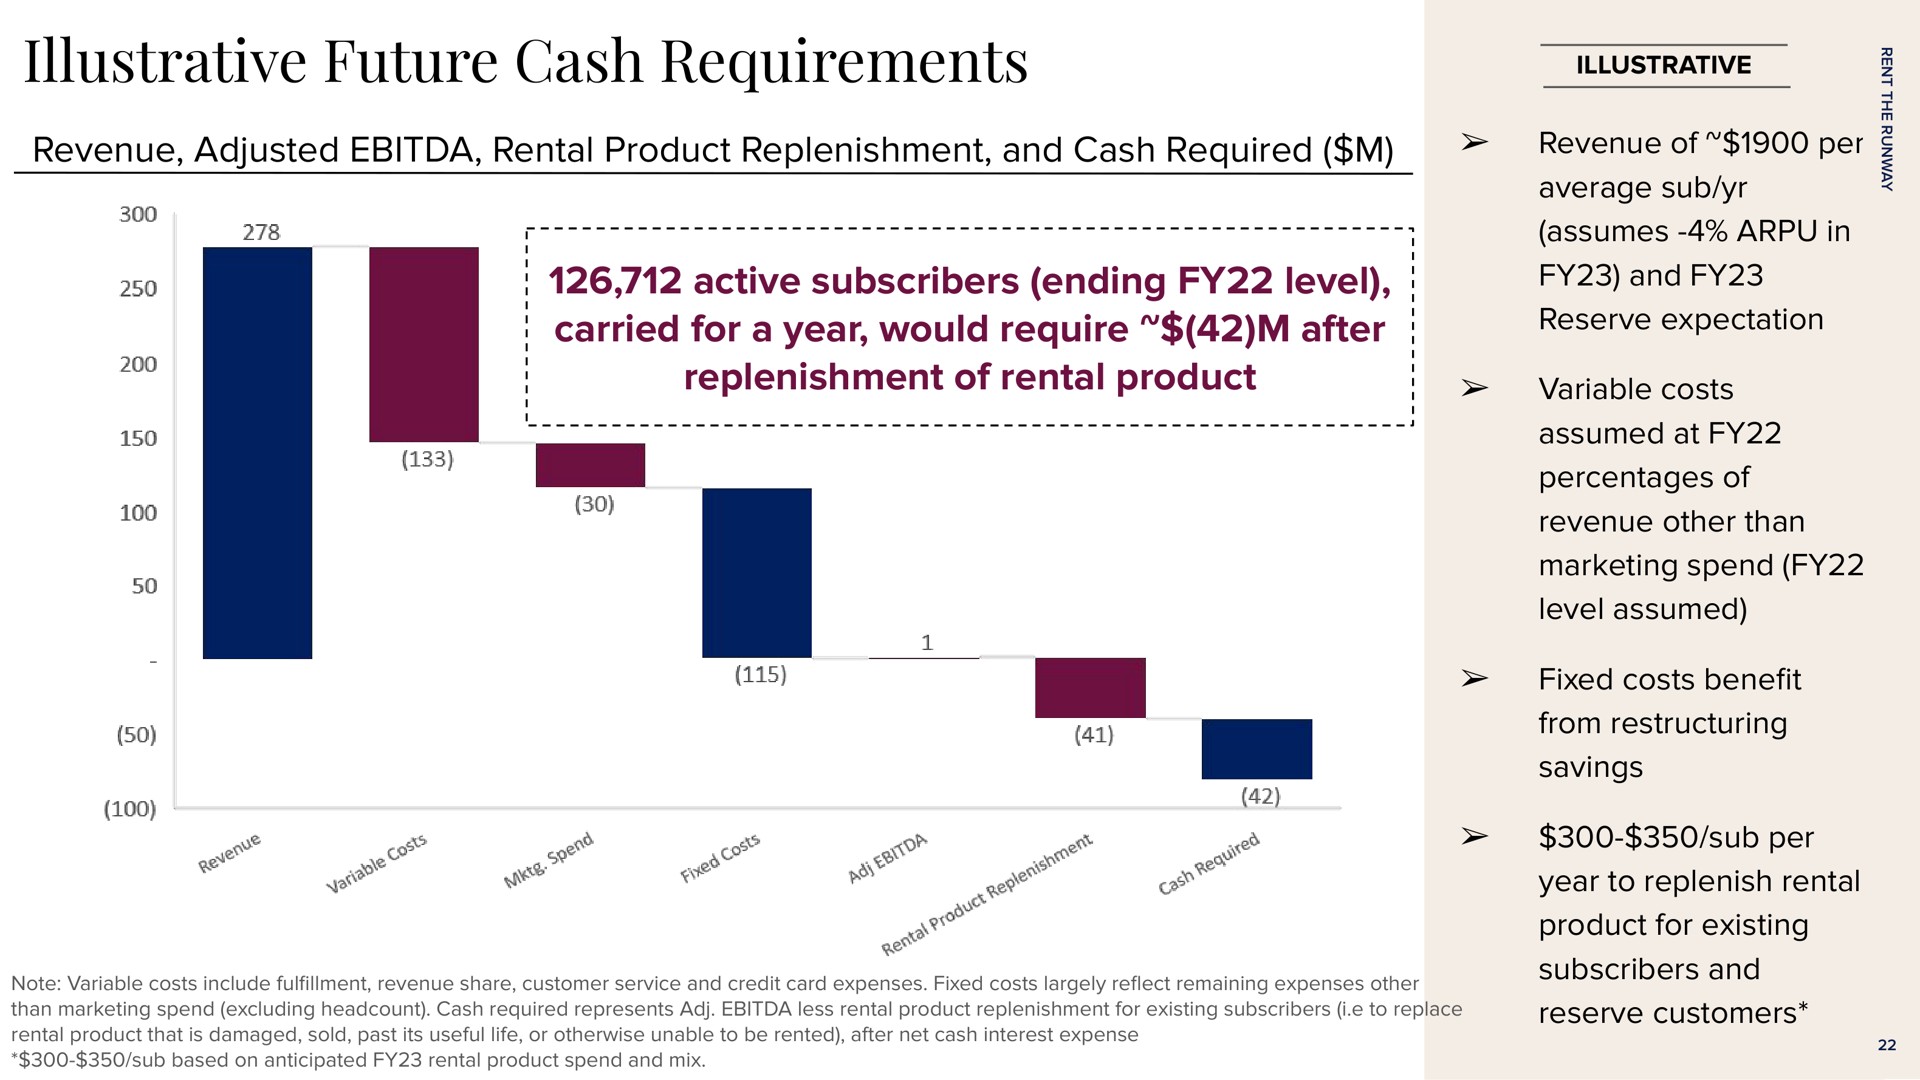 illustrative future cash requirements revenue adjusted rental product replenishment and cash required revenue of per active subscribers ending level carried for a year would require after replenishment of rental product average sub assumes in and reserve expectation variable costs assumed at percentages of revenue other than marketing spend level assumed fixed costs bene from savings sub per year to replenish rental product for existing subscribers and reserve customers i | Rent The Runway